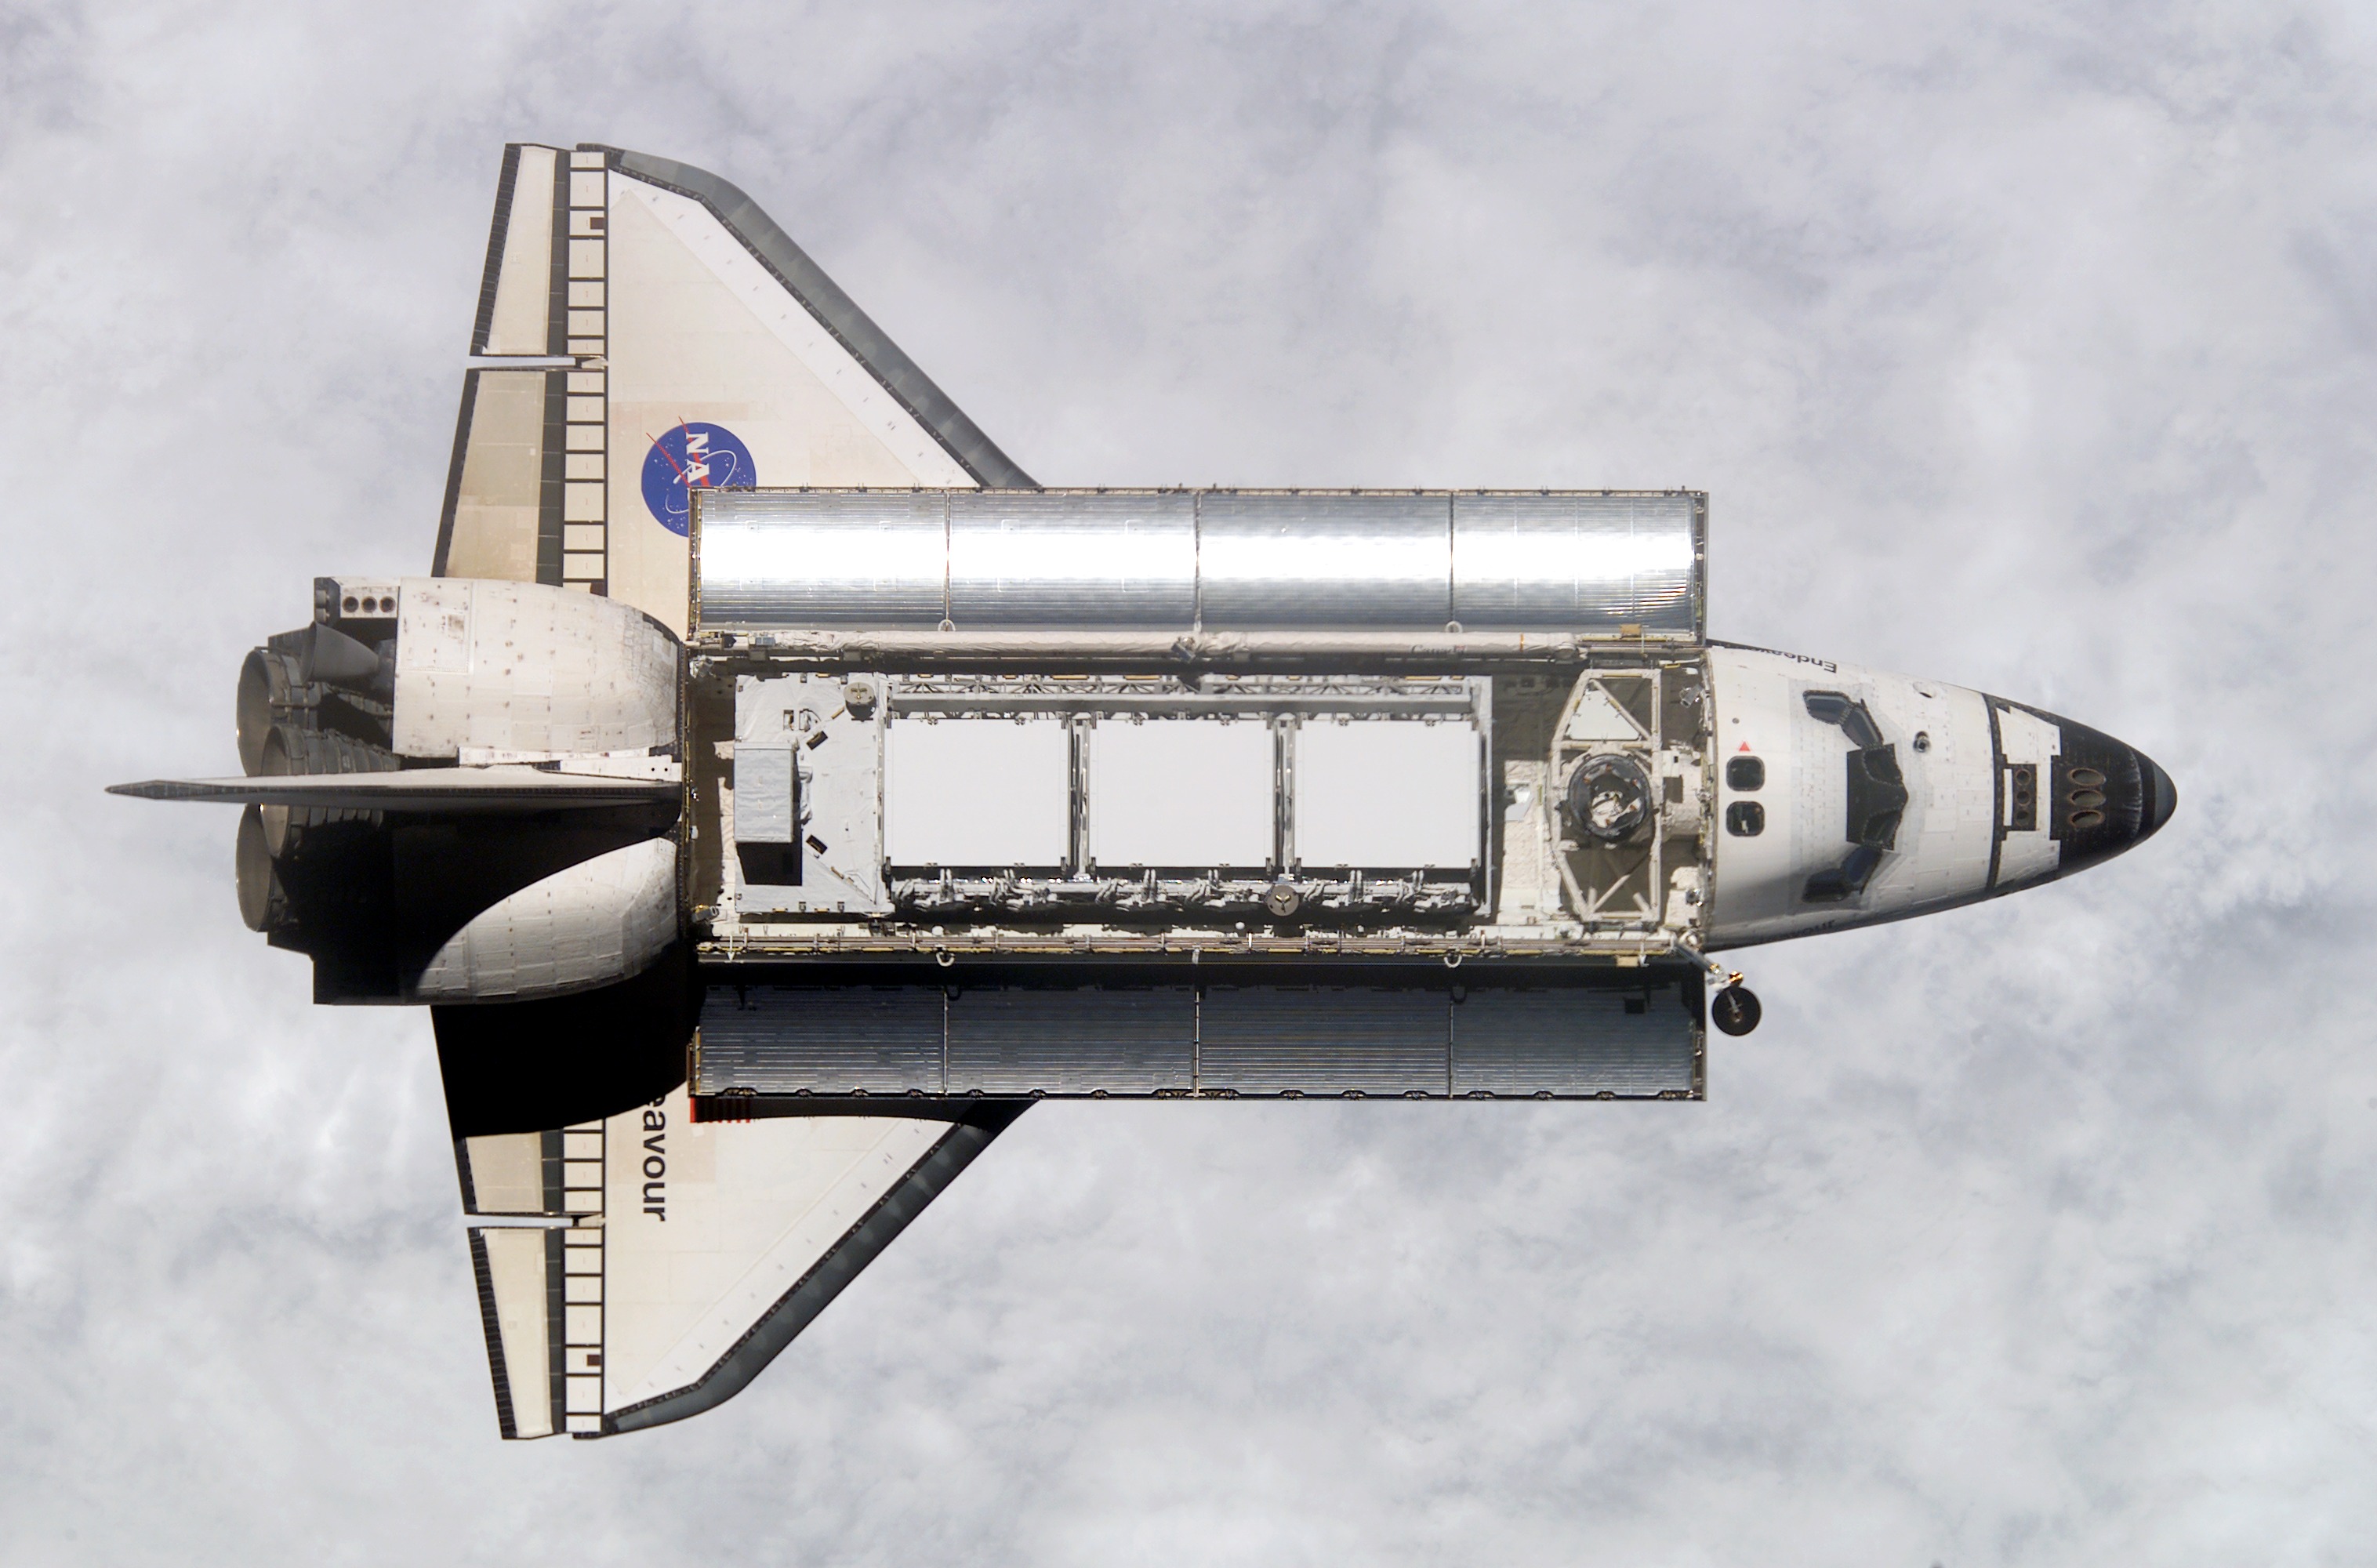 Space Shuttle Endeavour (OV-105) in Earth orbit, photographed from the International Space Station. The P1 Truss is in the open cargo bay. (NASA)